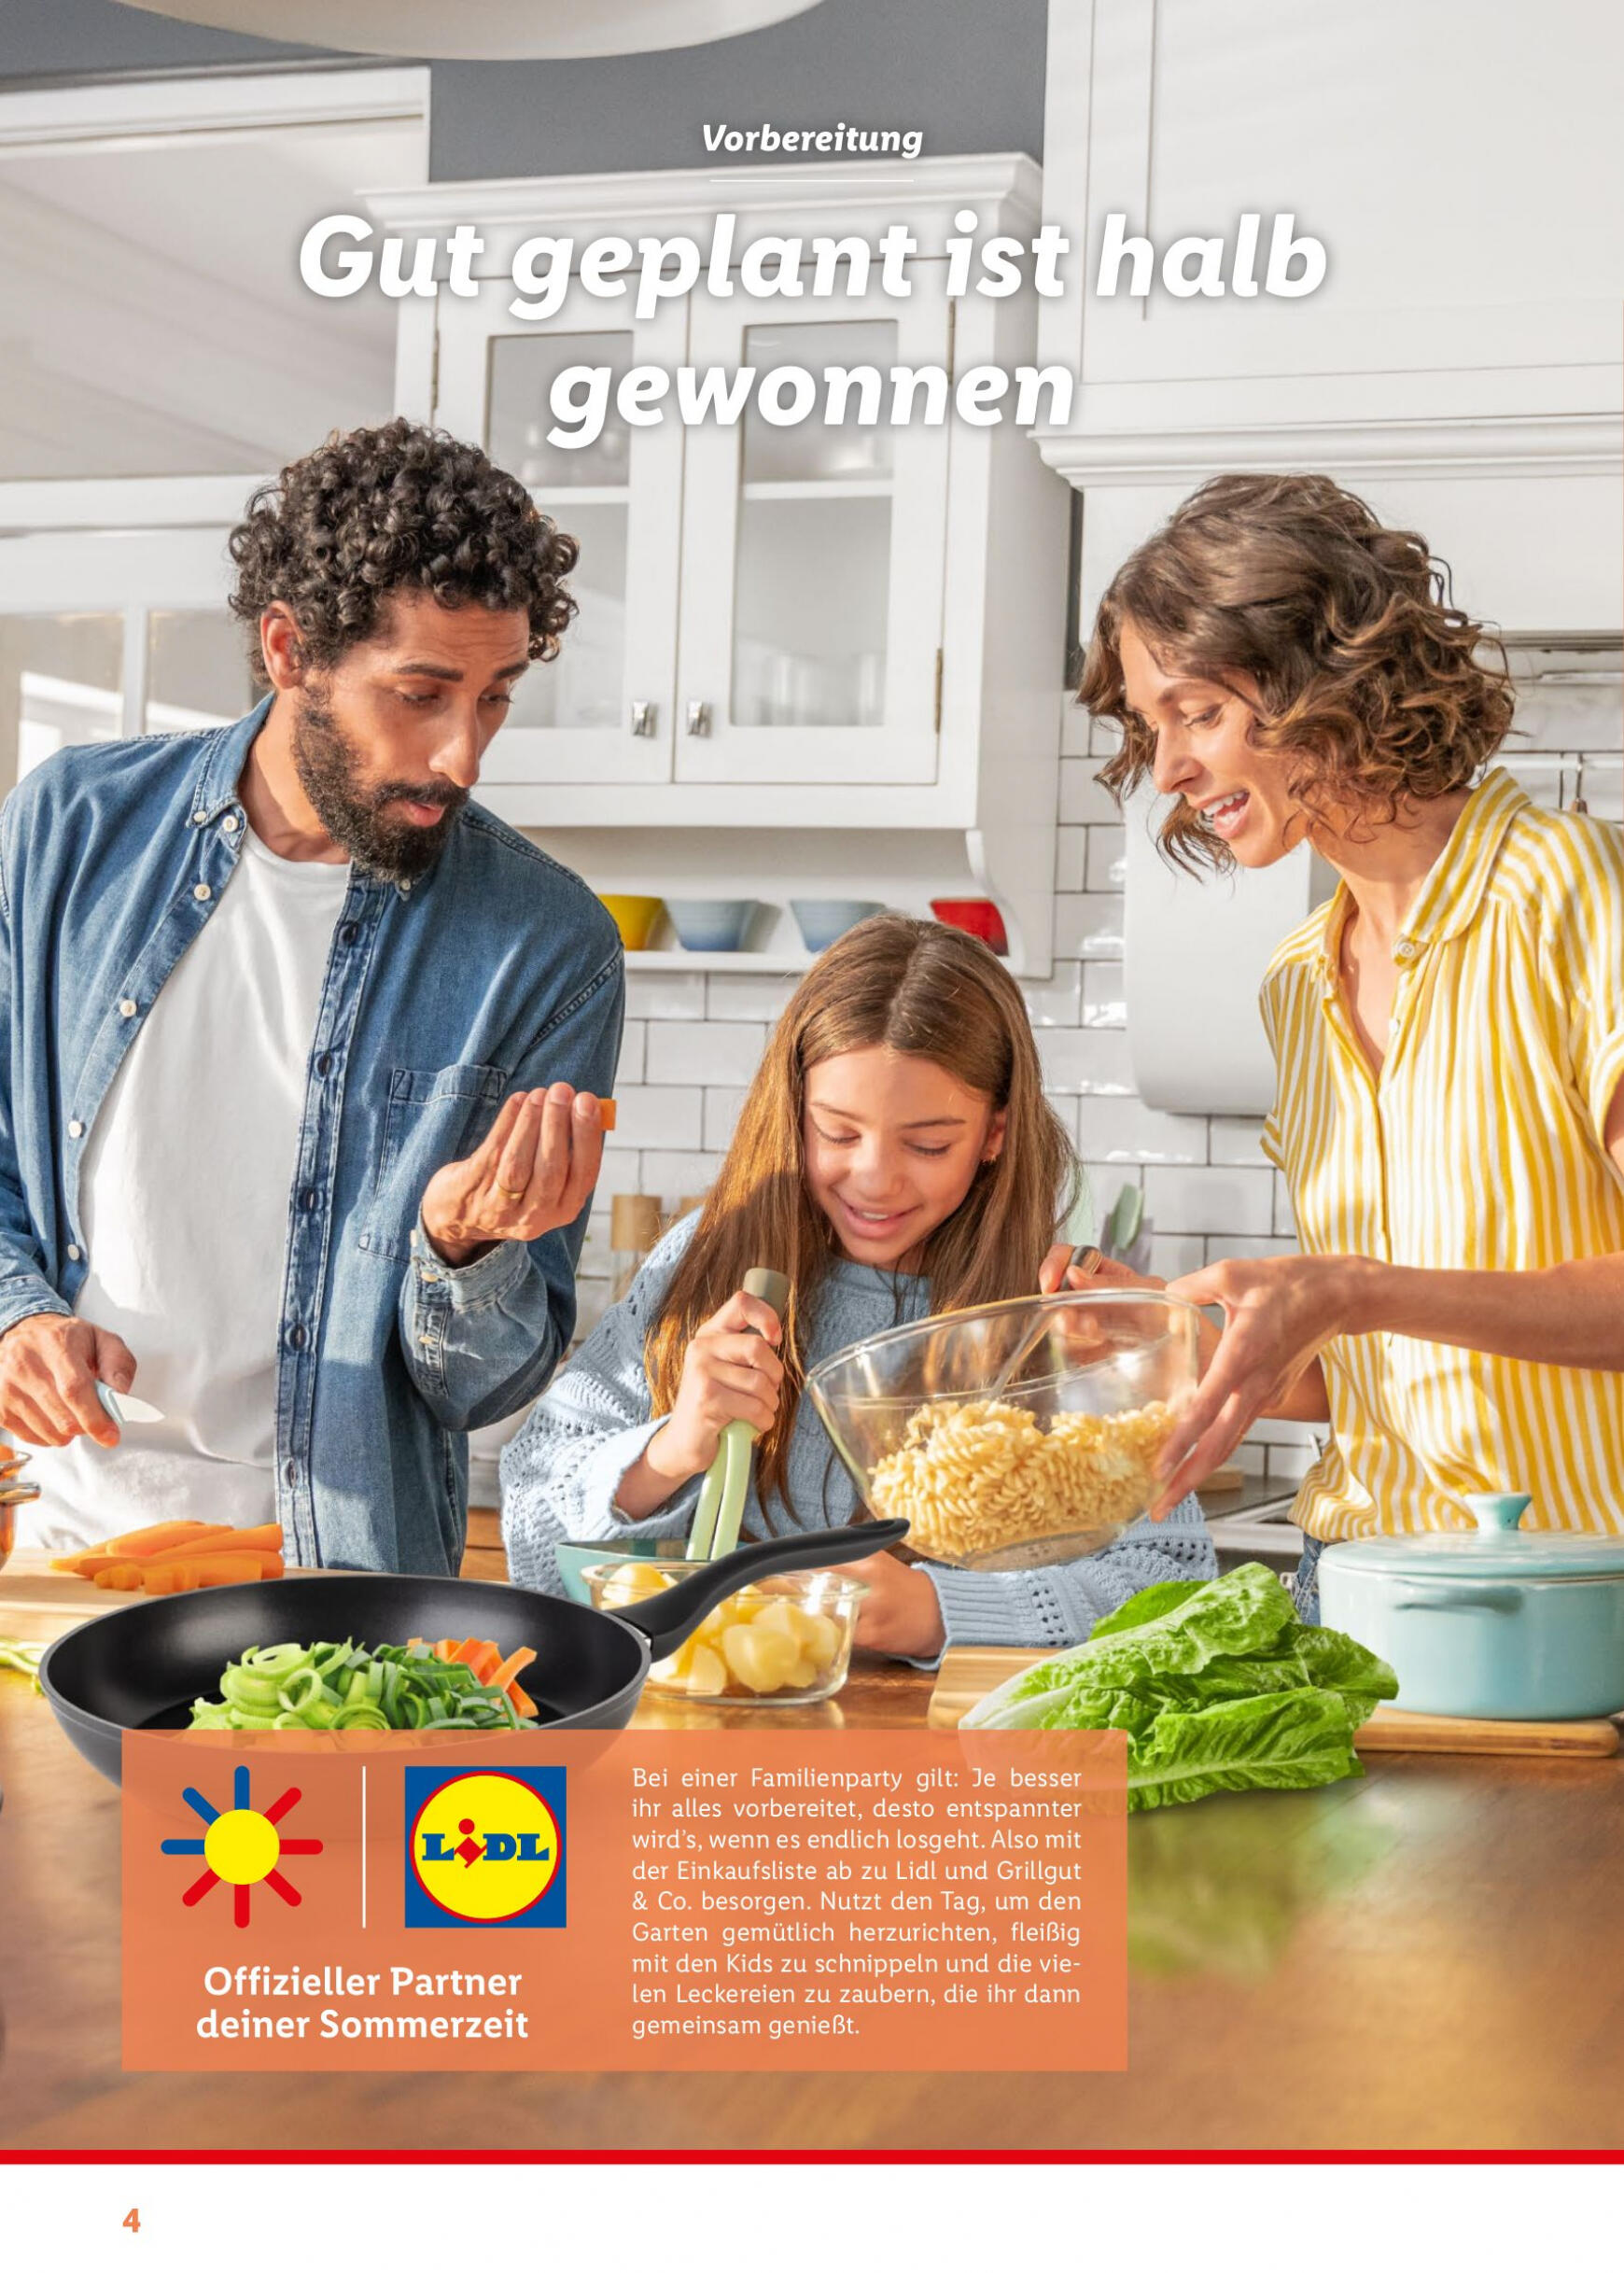 lidl - Flyer Lidl - aktuell 13.05. - 16.06. - page: 4